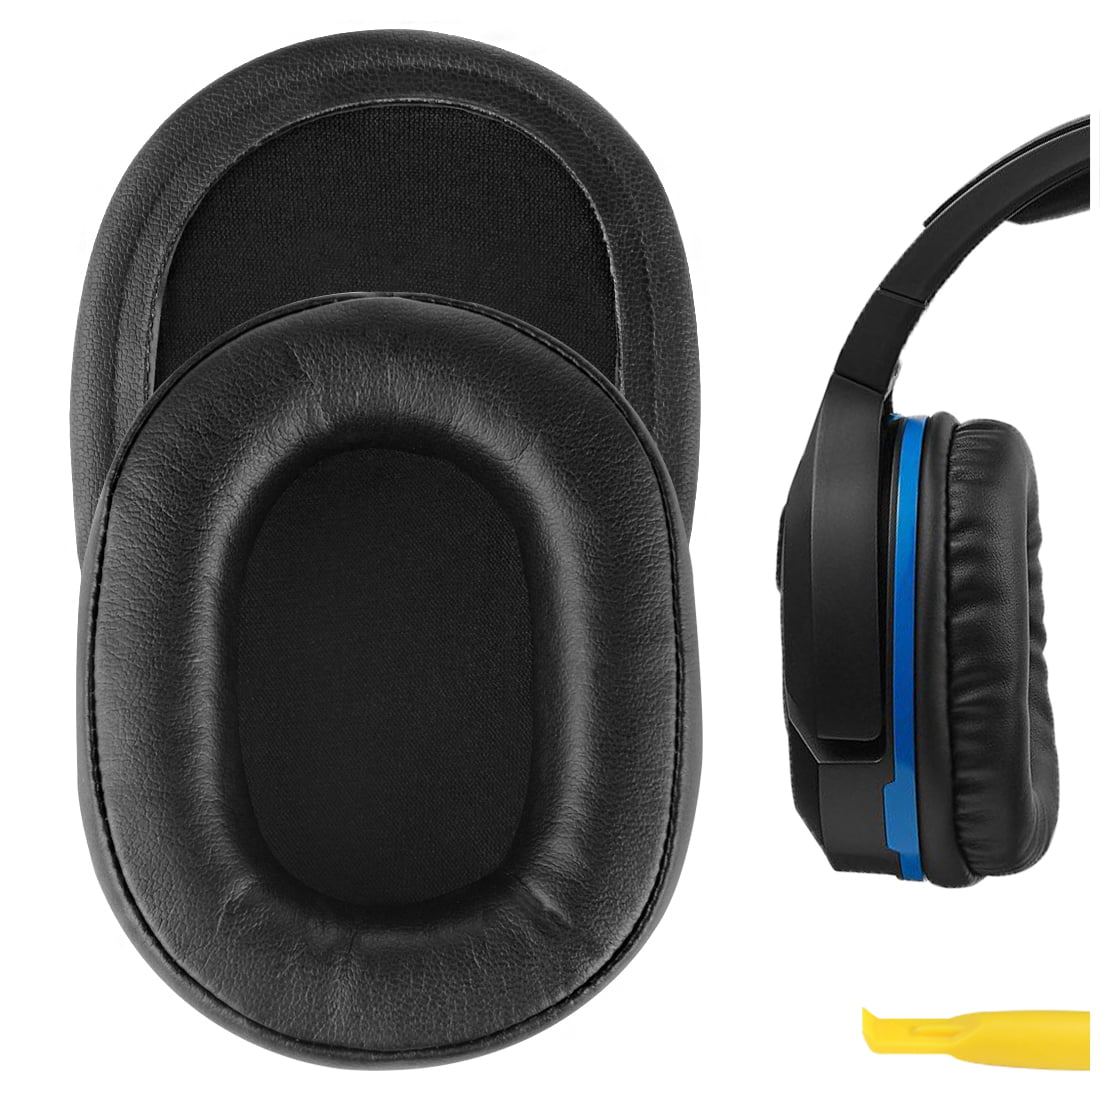 PX5 Ear Force XO Seven Headset Ear Cushion 500X Geekria Comfort Linen Replacement Ear Pads for Turtle Beach Stealth 400 Black PX4 700X X42 Gaming Headphones Earpads 420X XP500 